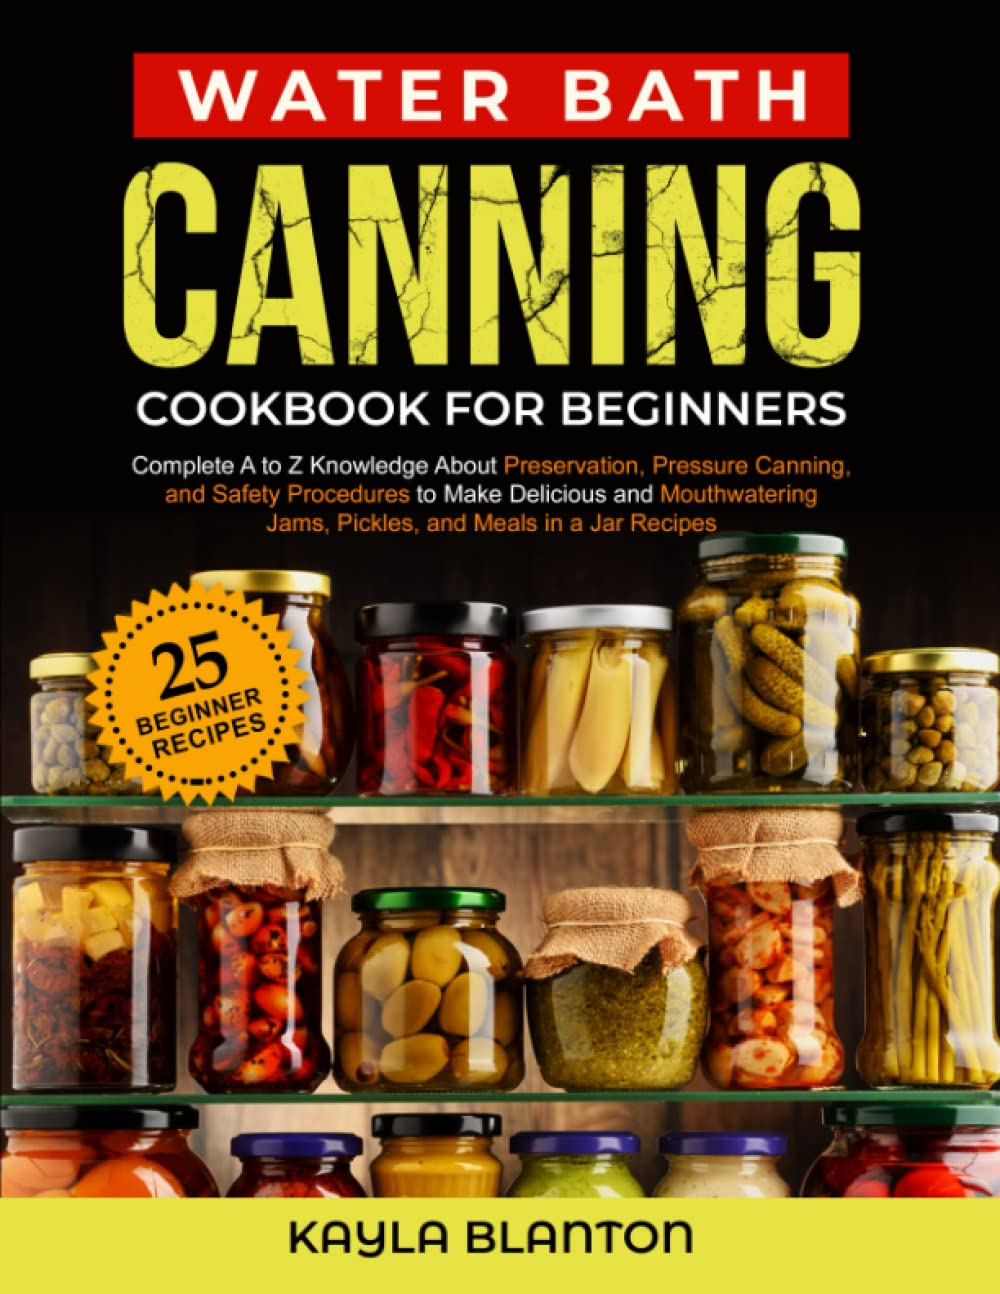 Water Bath Canning Cookbook For Beginners: Complete A to Z Knowledge About Preservation, Pressure Canning, and Safety Procedures to Make Delicious and ... Jams, Pickles, and Meals in a Jar Recipes